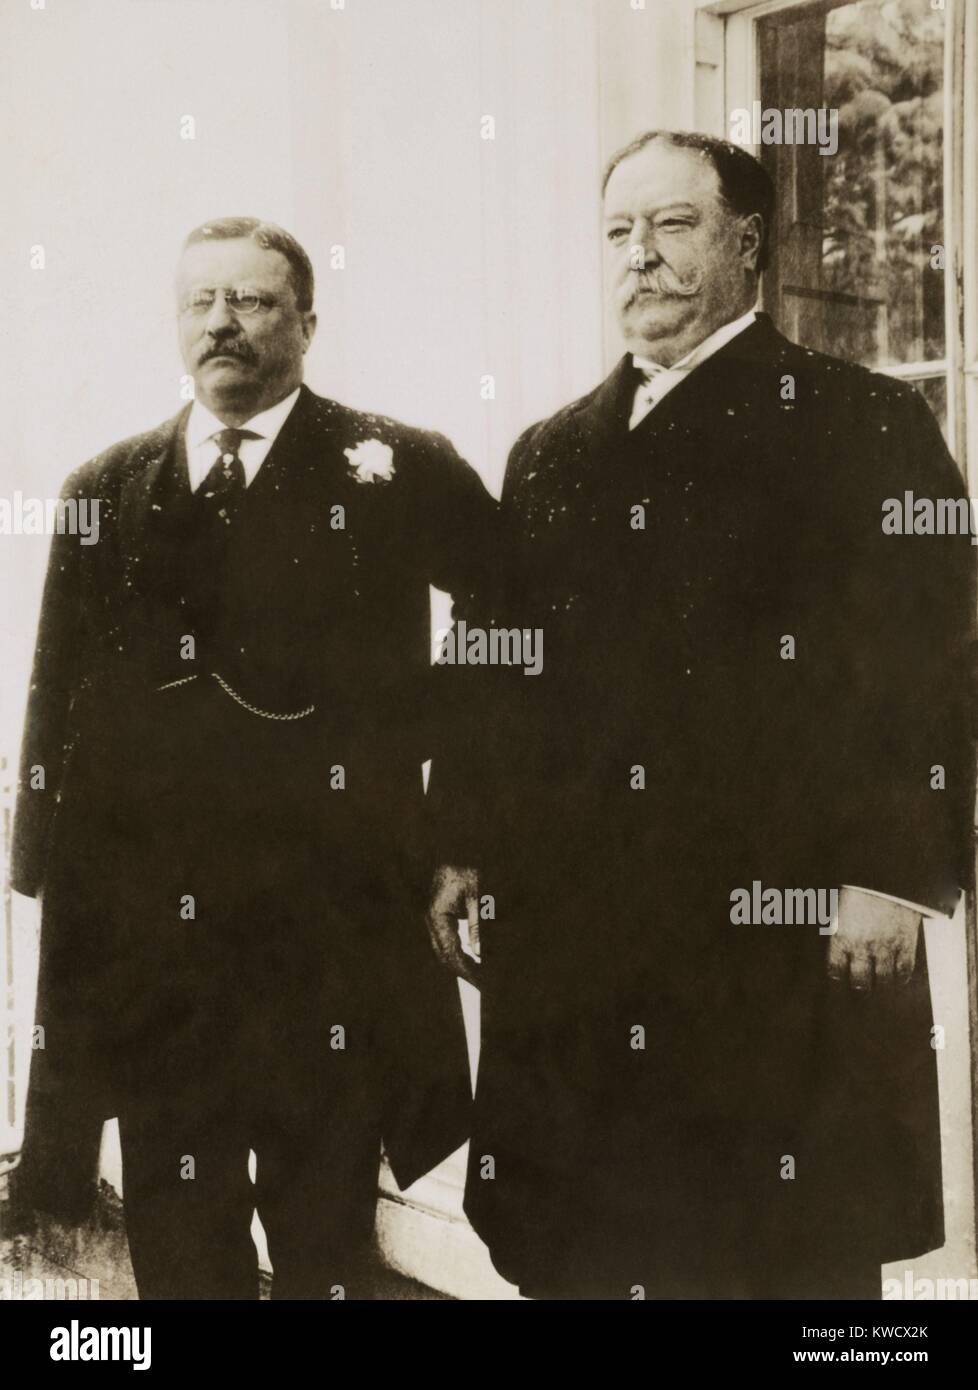 Outgoing President Theodore Roosevelt and President elect William H. Taft, March 4, 1909. They shoulders are covered with the snow on the cold inauguration day (BSLOC 2017 2 112) Stock Photo